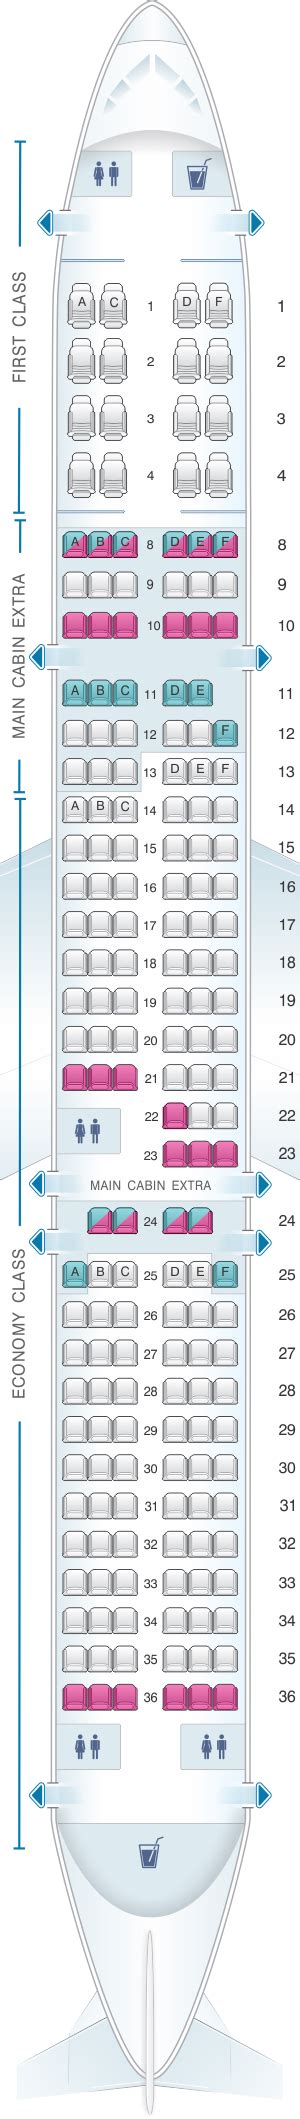 For your next American Airlines flight, use this seating chart to get the most ... American Airlines Seat Maps. ... Airbus A320 (320) Airbus A321 (321) Layout 1;